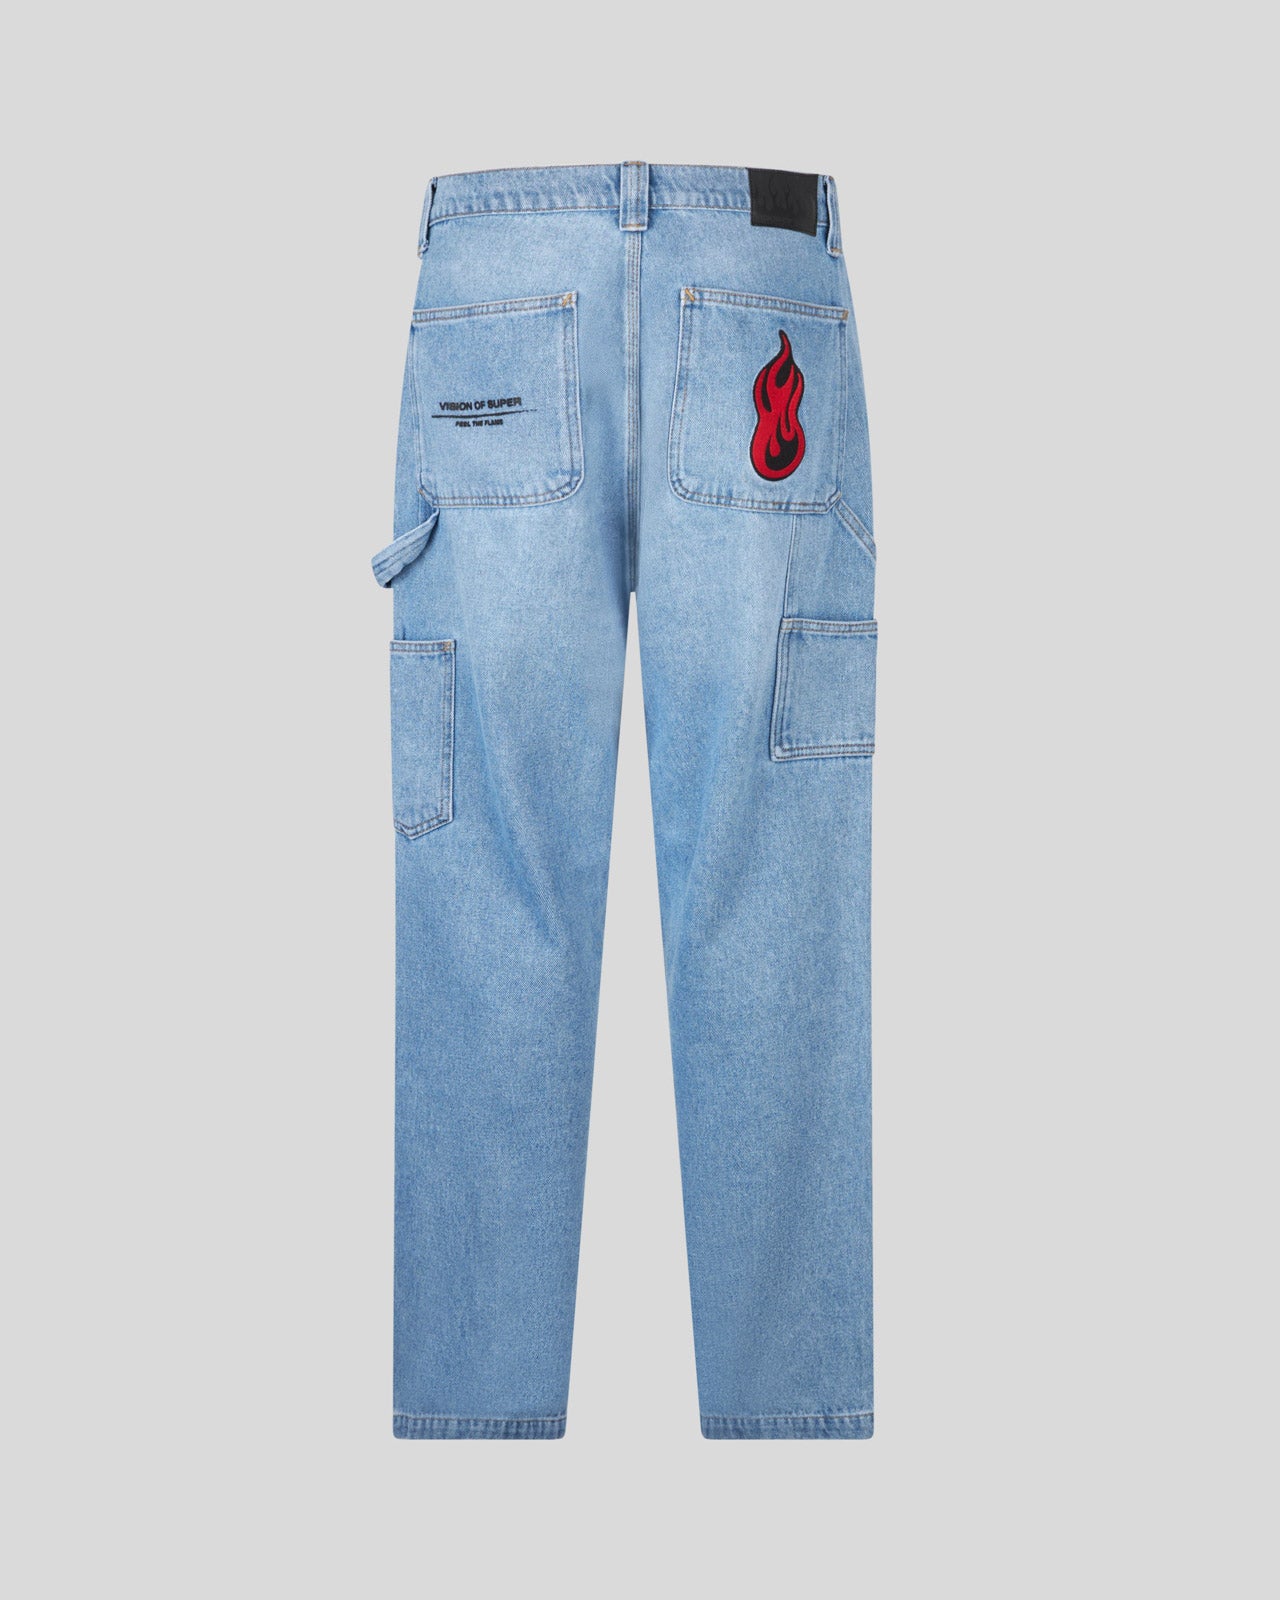 WORKER DENIM PANTS WITH ICONIC FLAMES PATCH